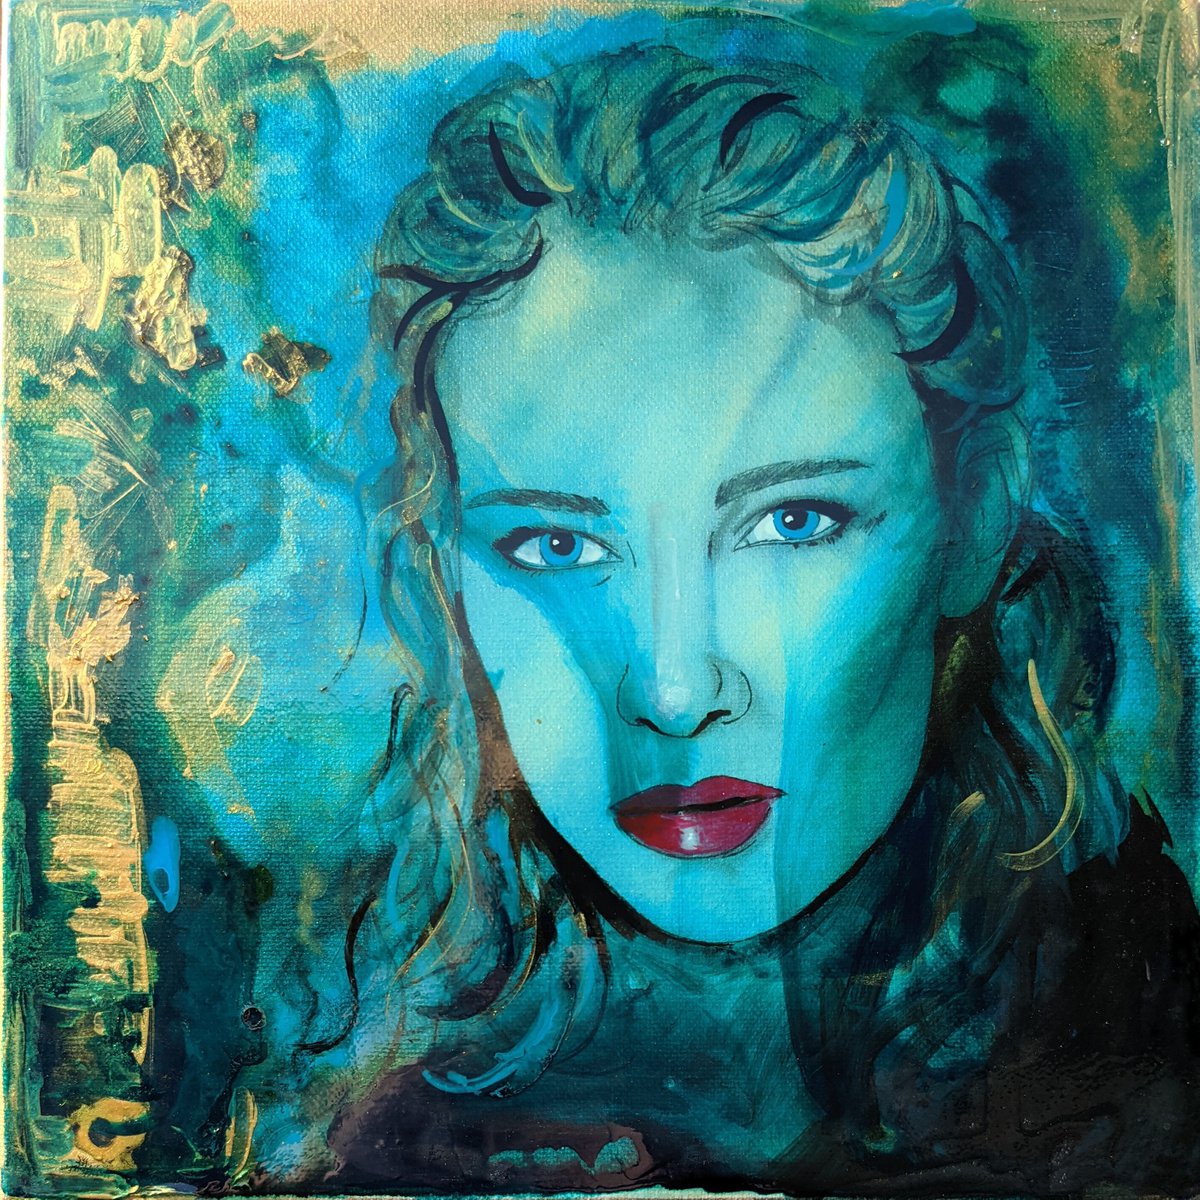 Rose Petal, teal and gold mermaid portrait, contemporary portrait by Dianne Bowell